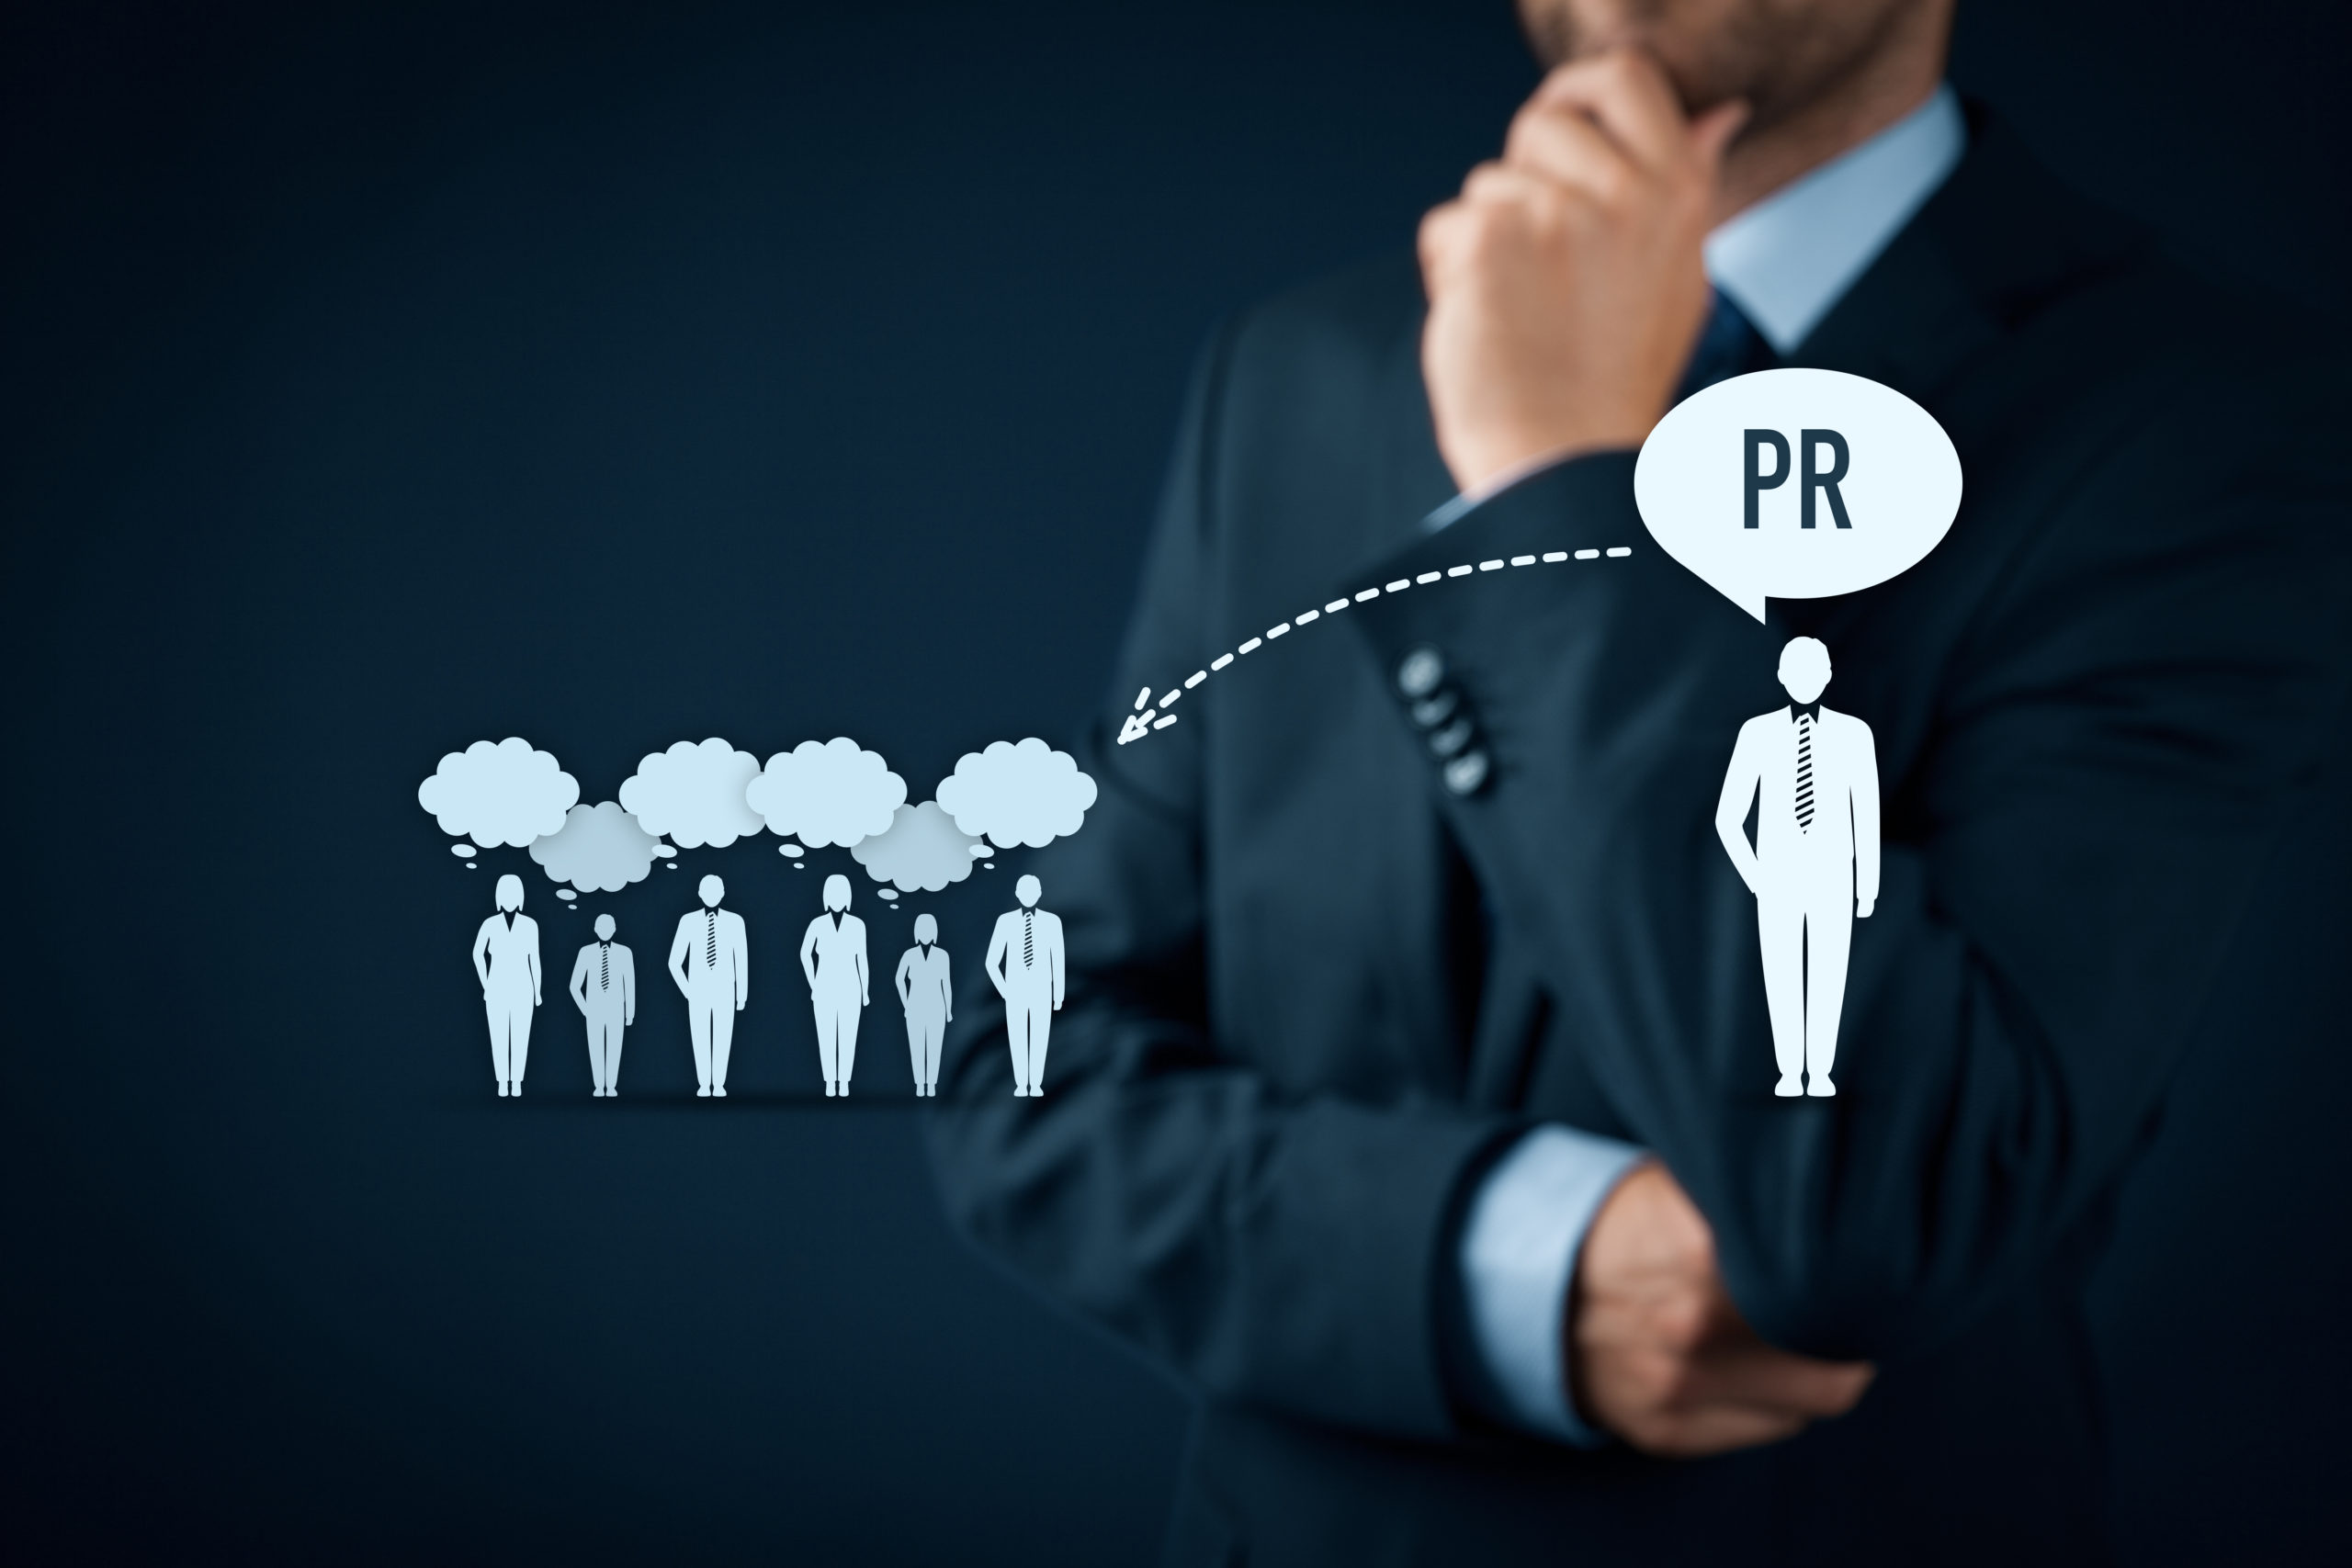 Public Relations Firms